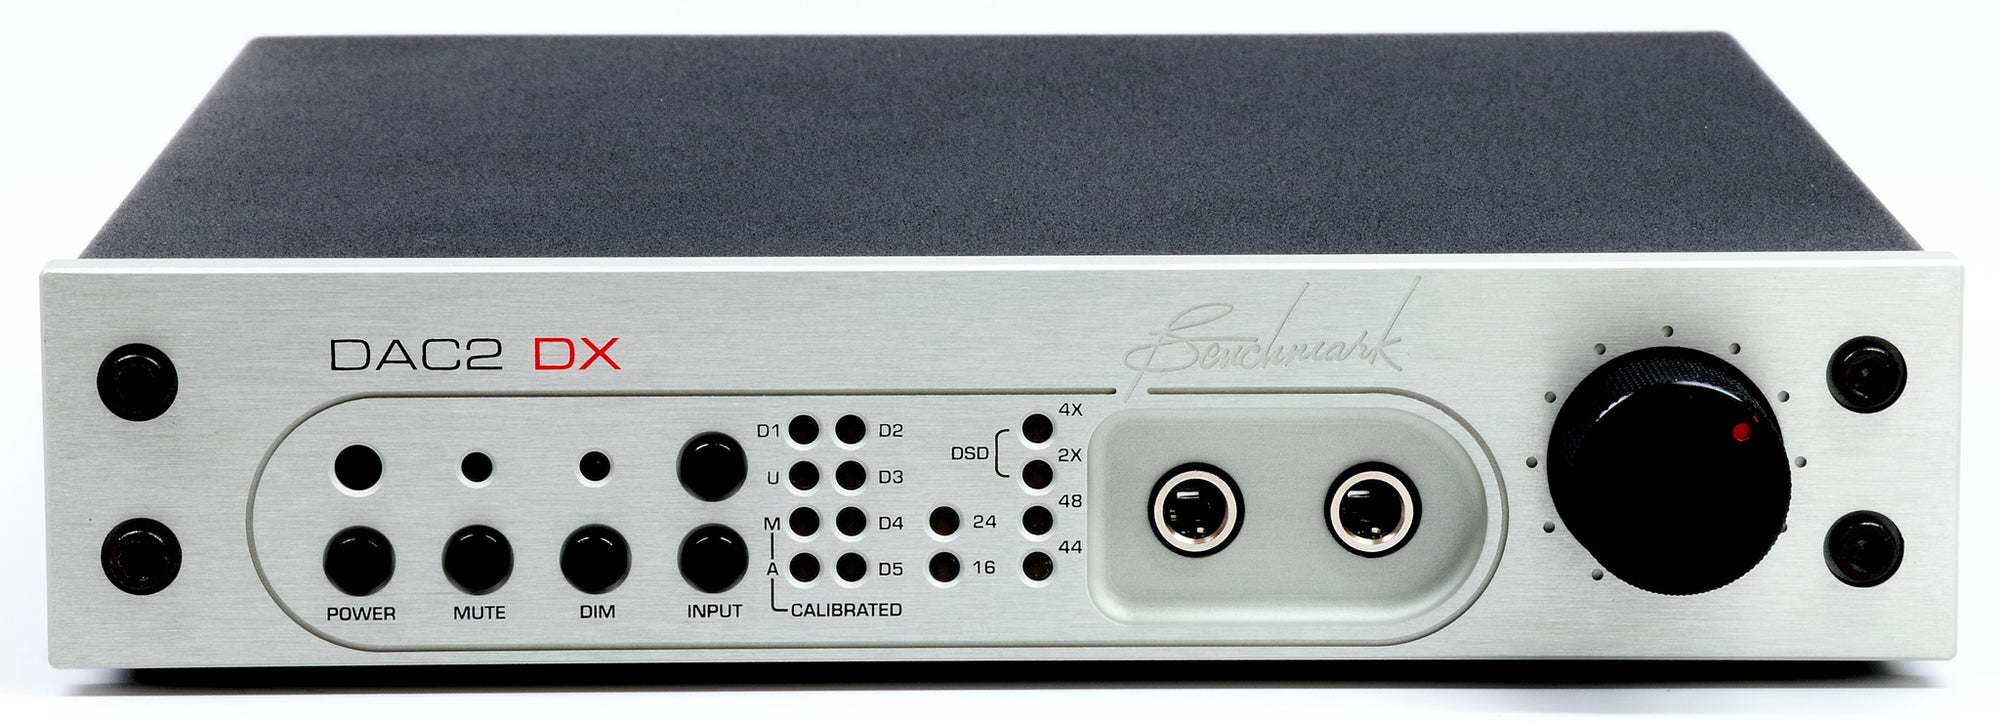 Benchmark DAC2 DX Silver - front